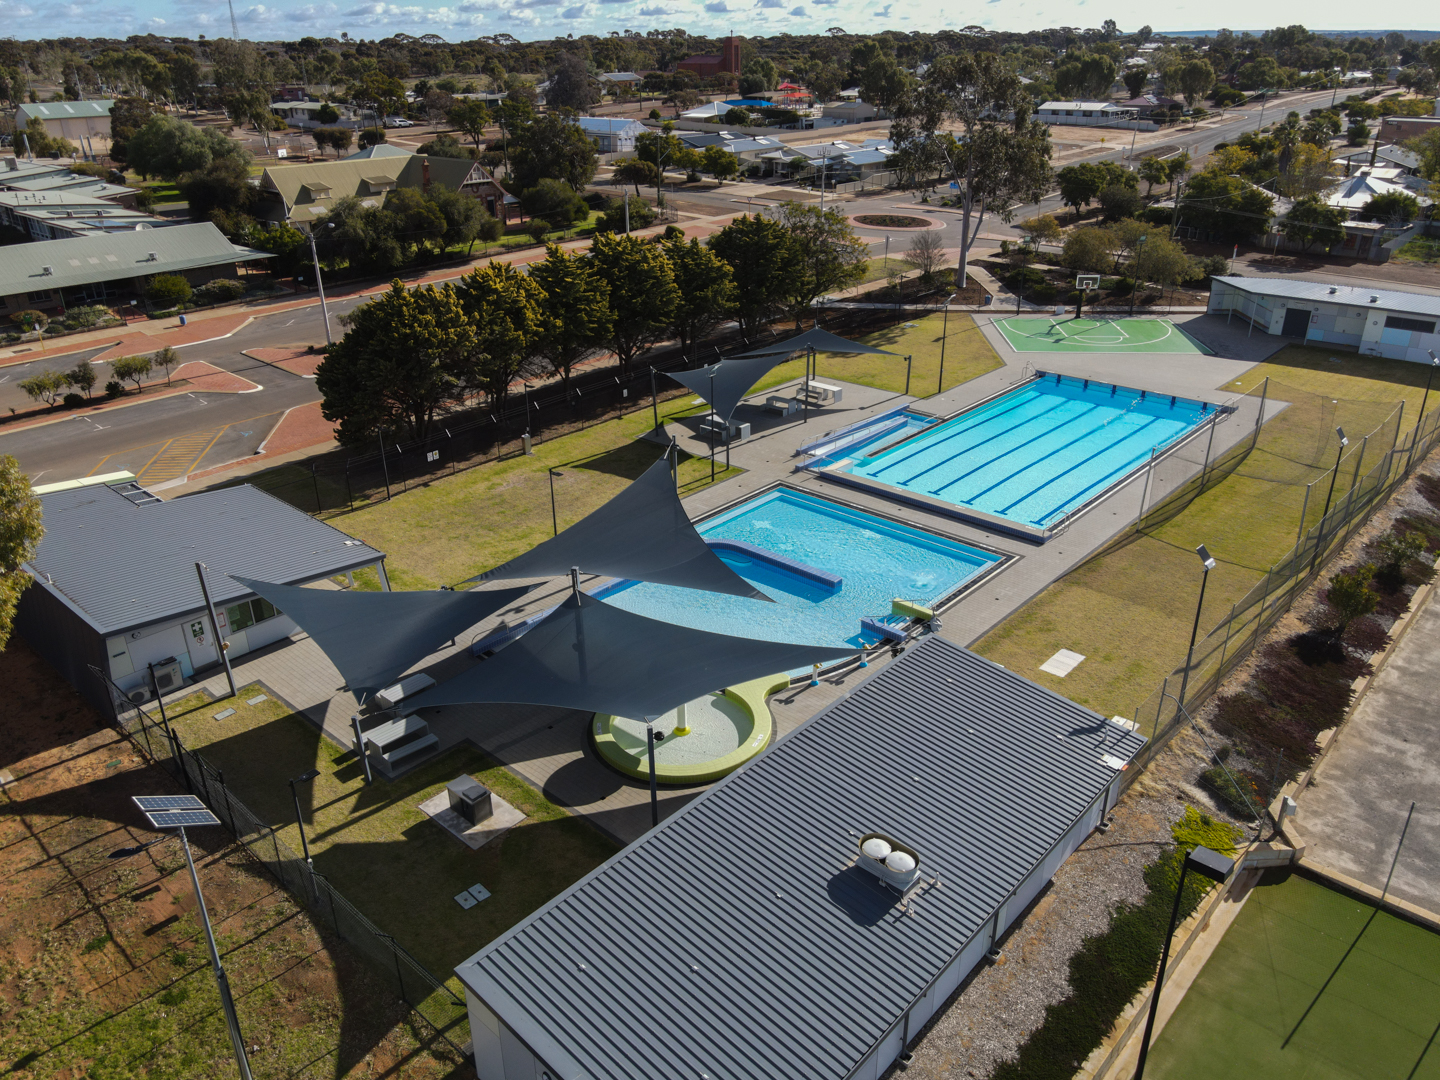 Swimming pool drone pic by Charles Jenkins, www.cjphotoau.com